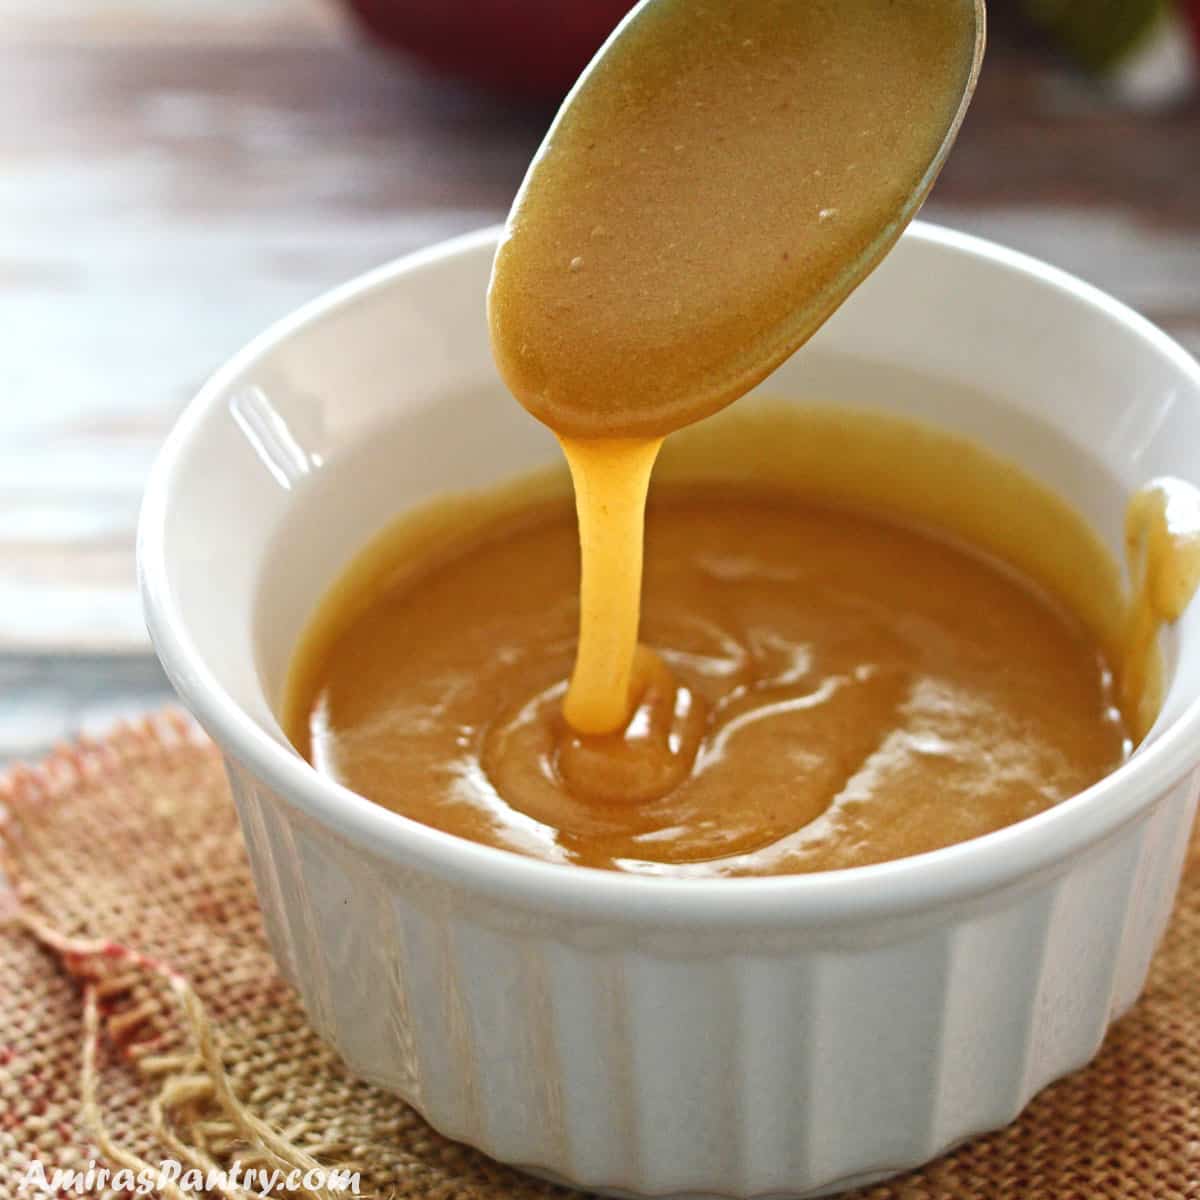 A spoon pouring some date caramel into a white bowl.